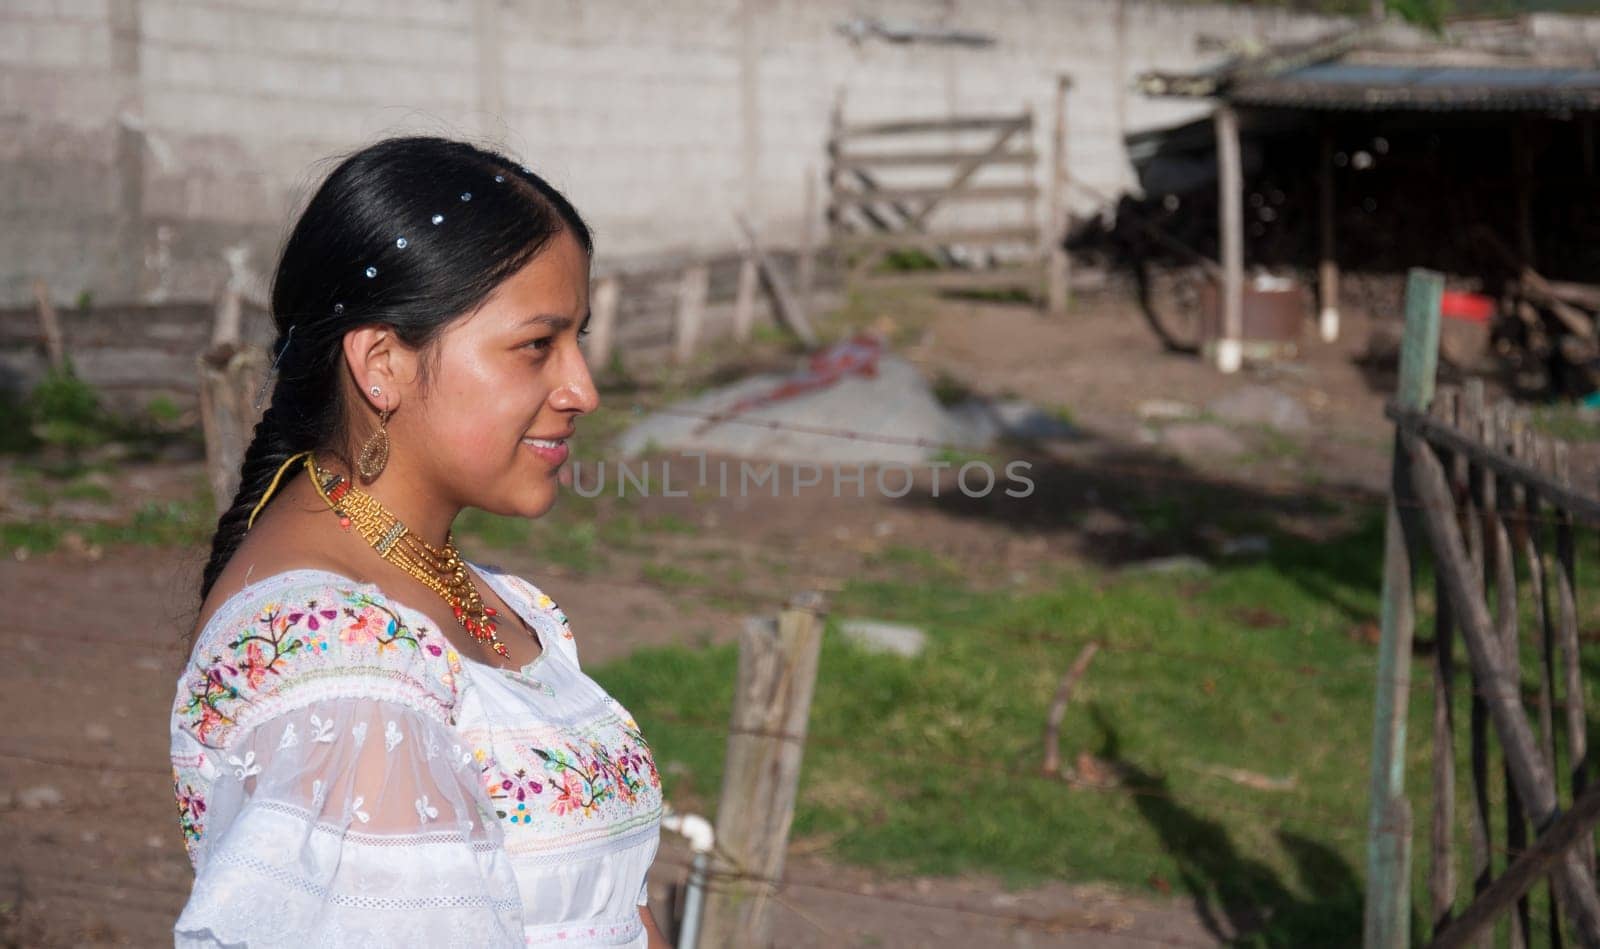 copy-space of a South American girl on her farm tending her land in traditional dress from Otavalo, Ecuador.Hispanic Heritage Month by Raulmartin